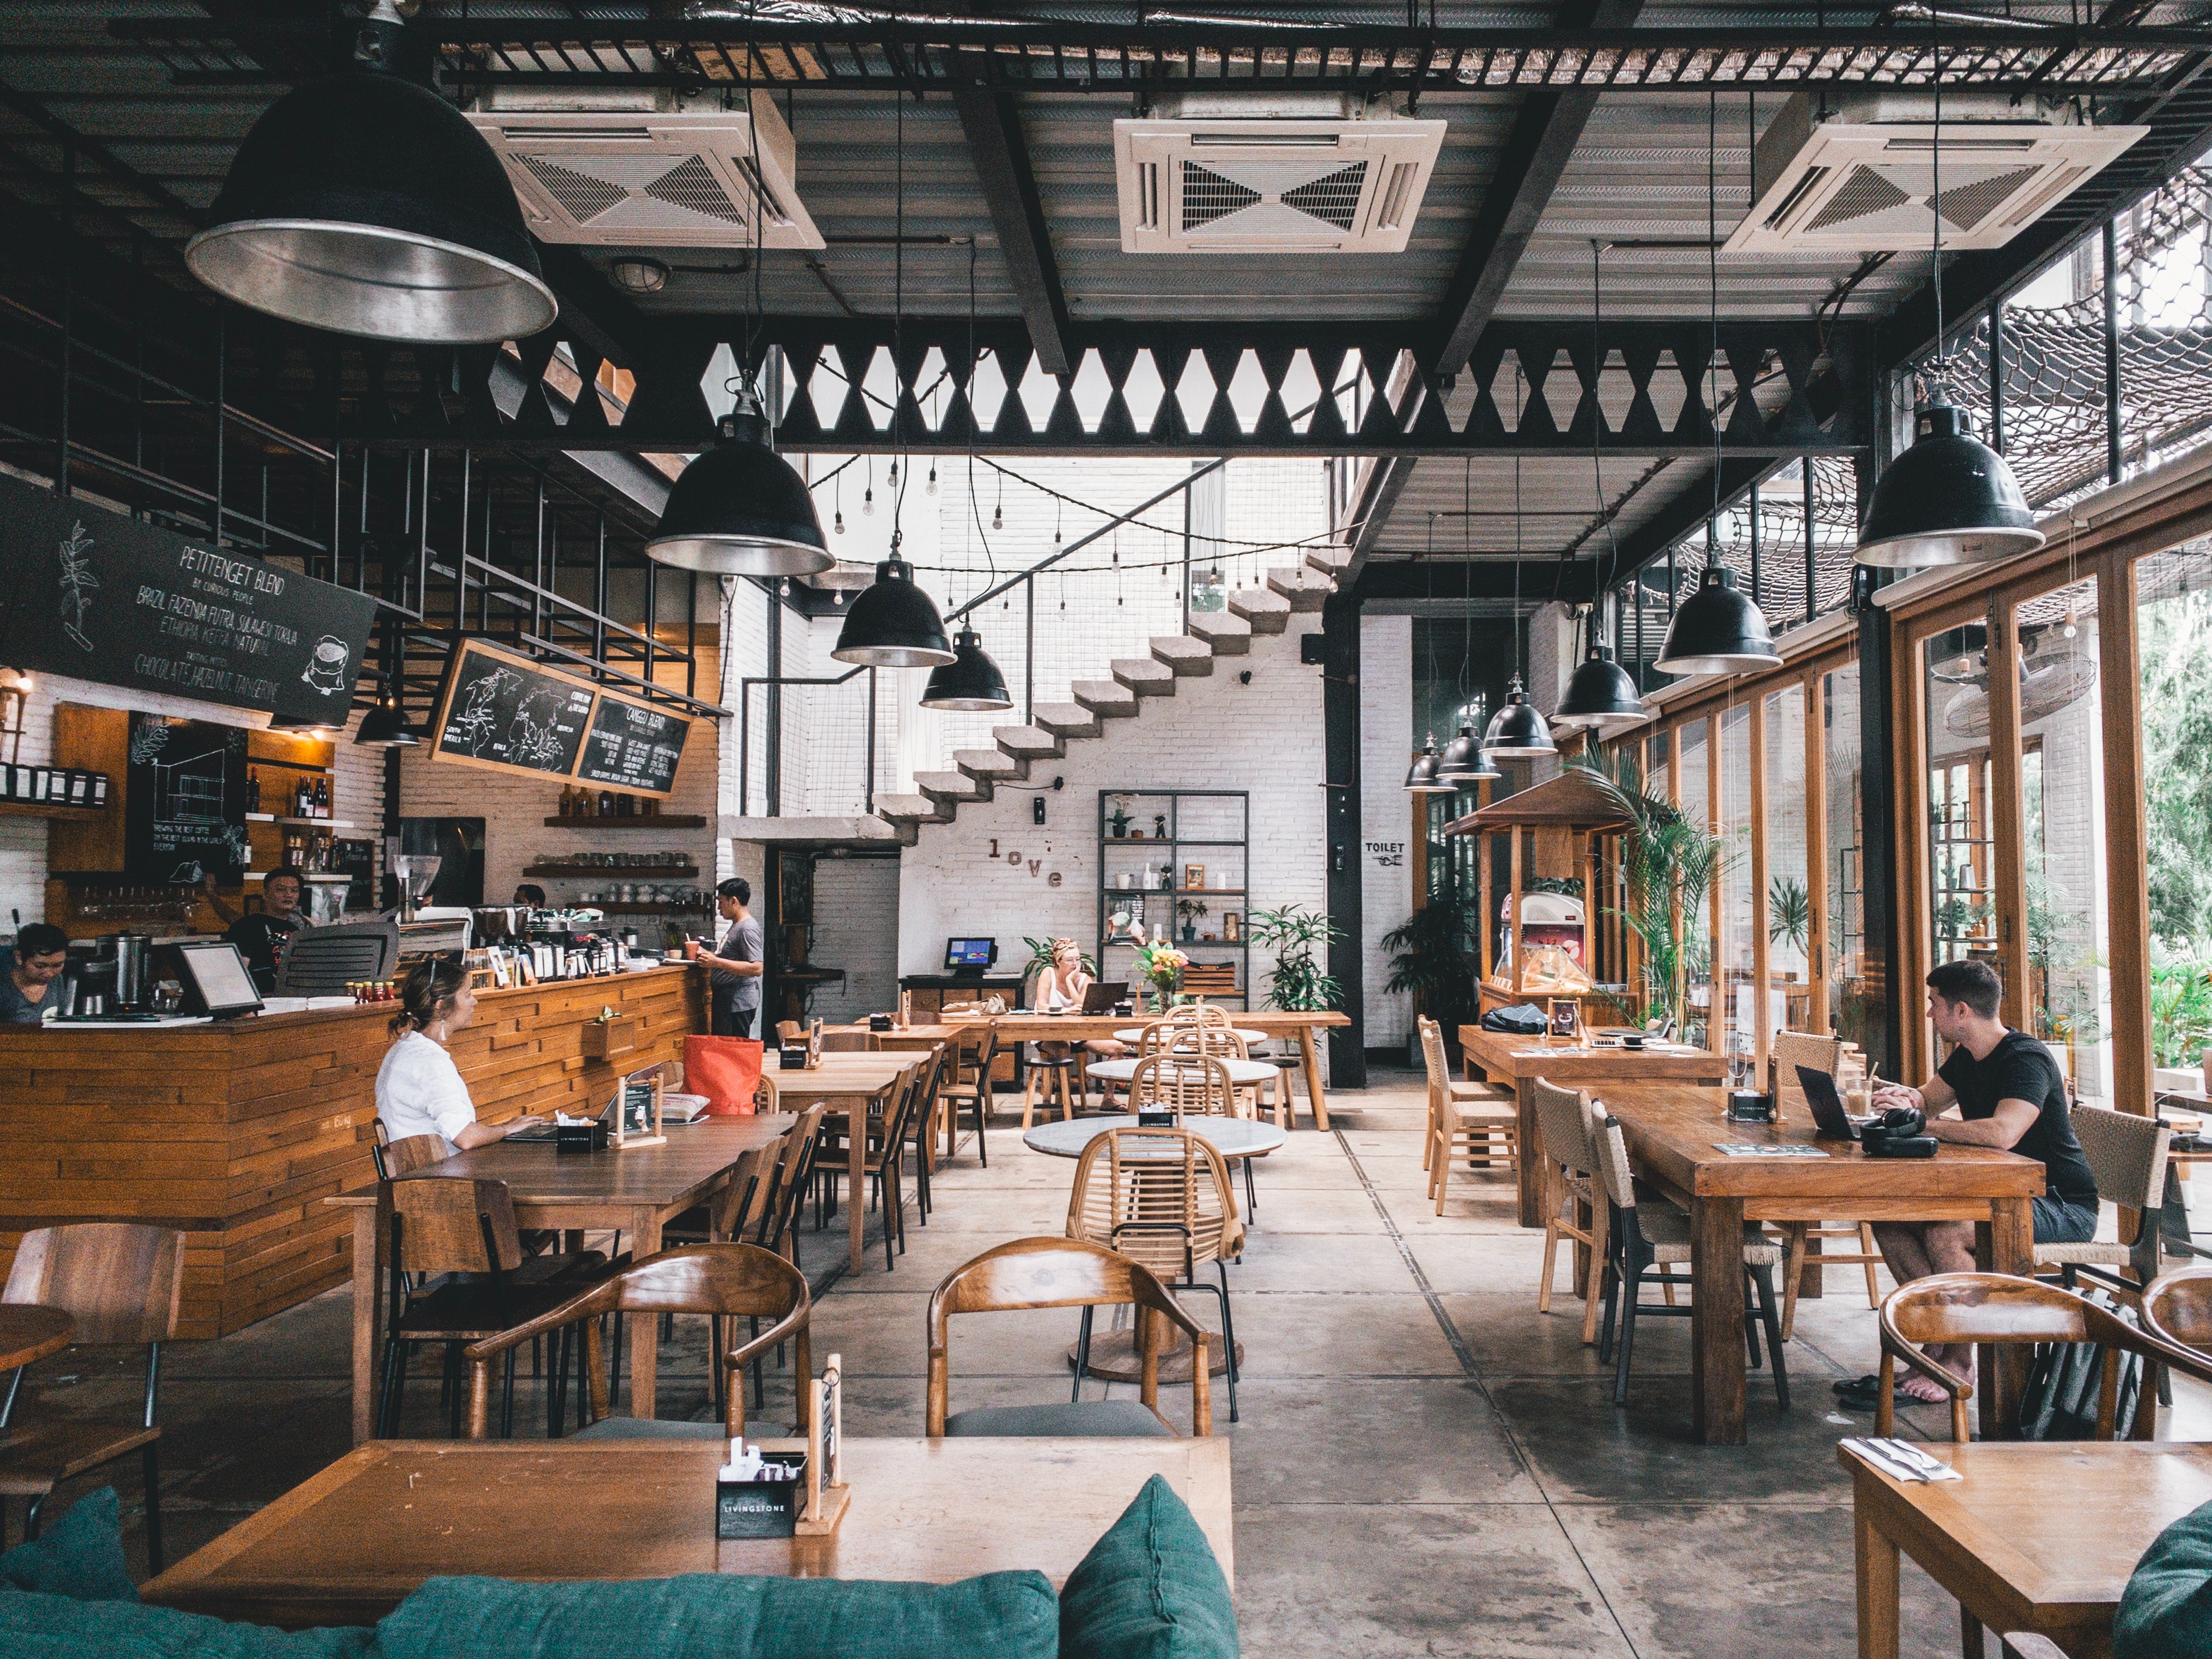 5 Expenses to Anticipate in the Restaurant Business